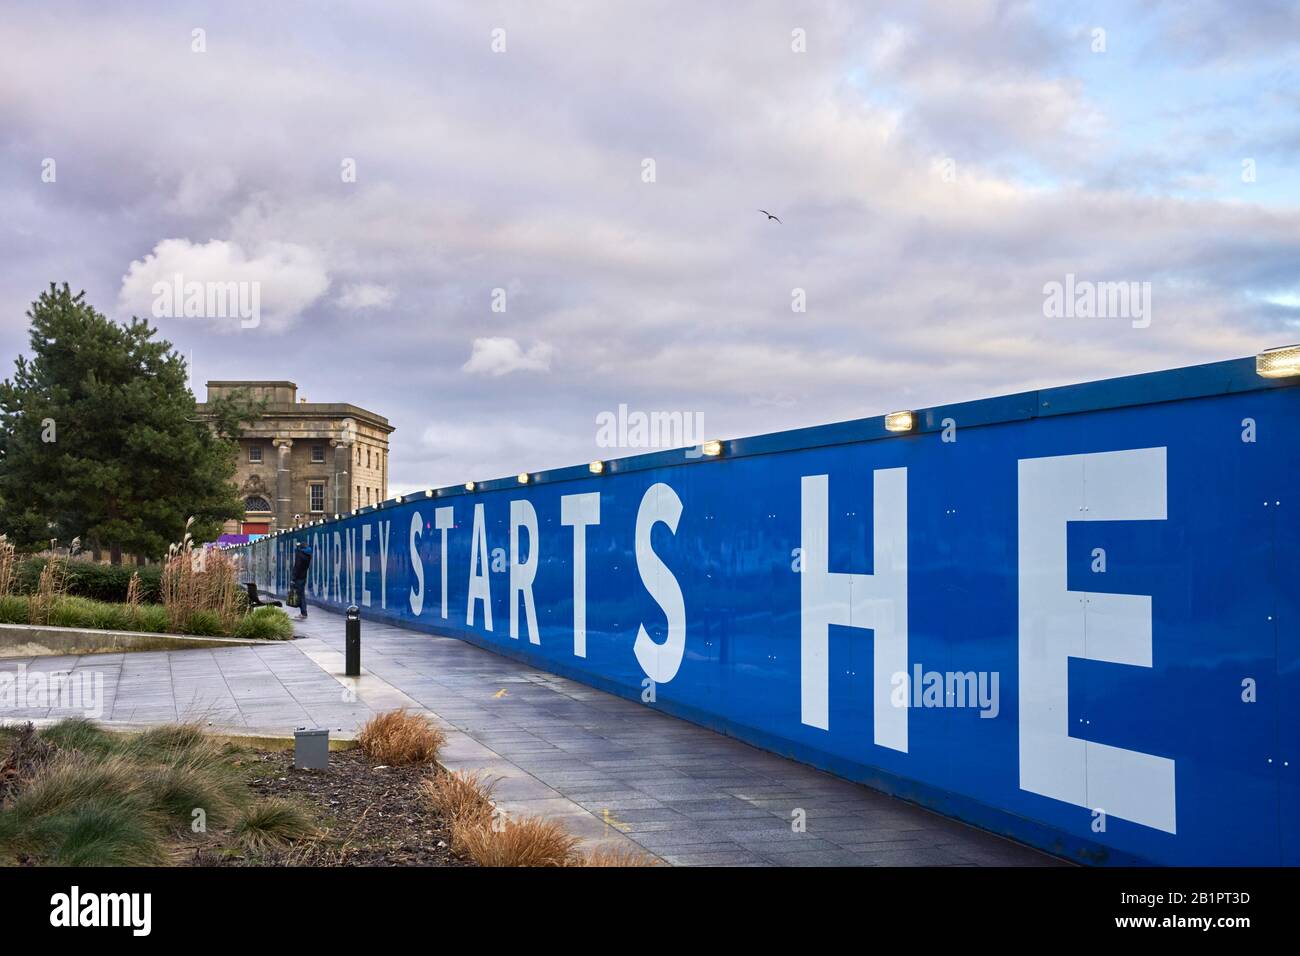 The existing Curzon Street station building in Digbeth area of Birmingham that will form part of the new HS2 railway with site posters Stock Photo